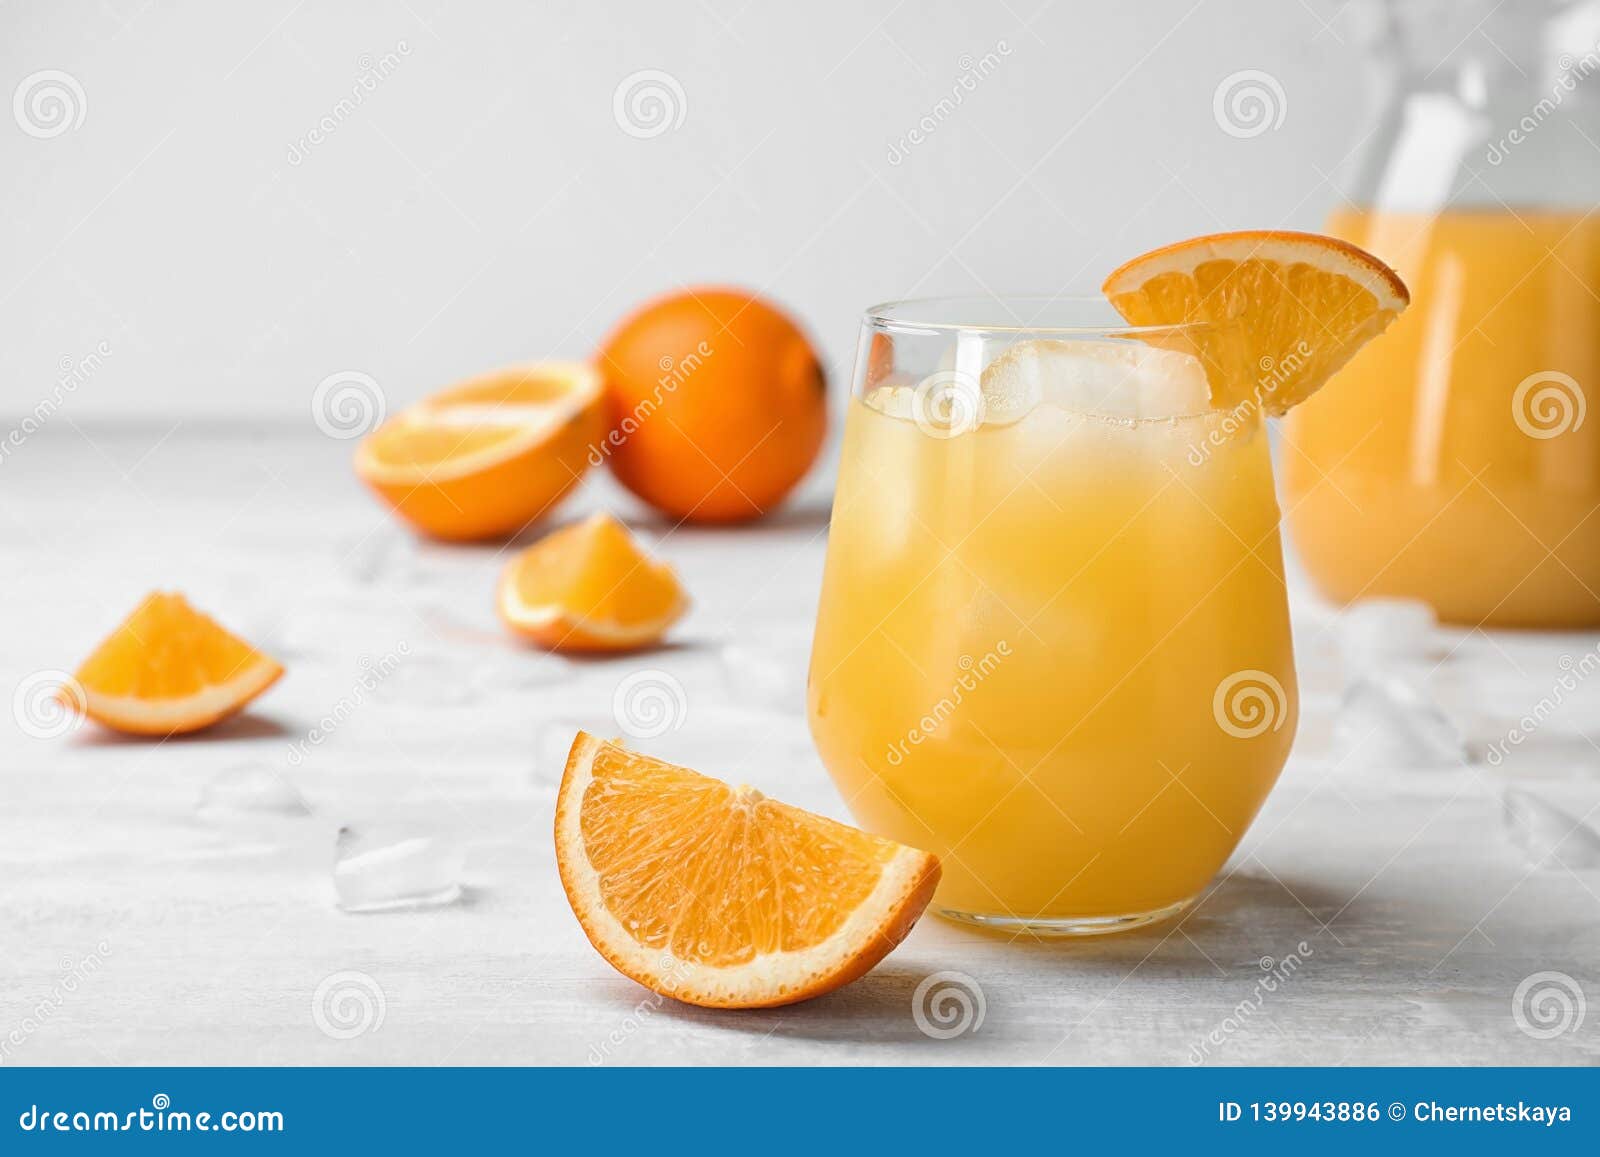 Juice In Glass Jar And Orange On Kitchen Table. Stock Photo